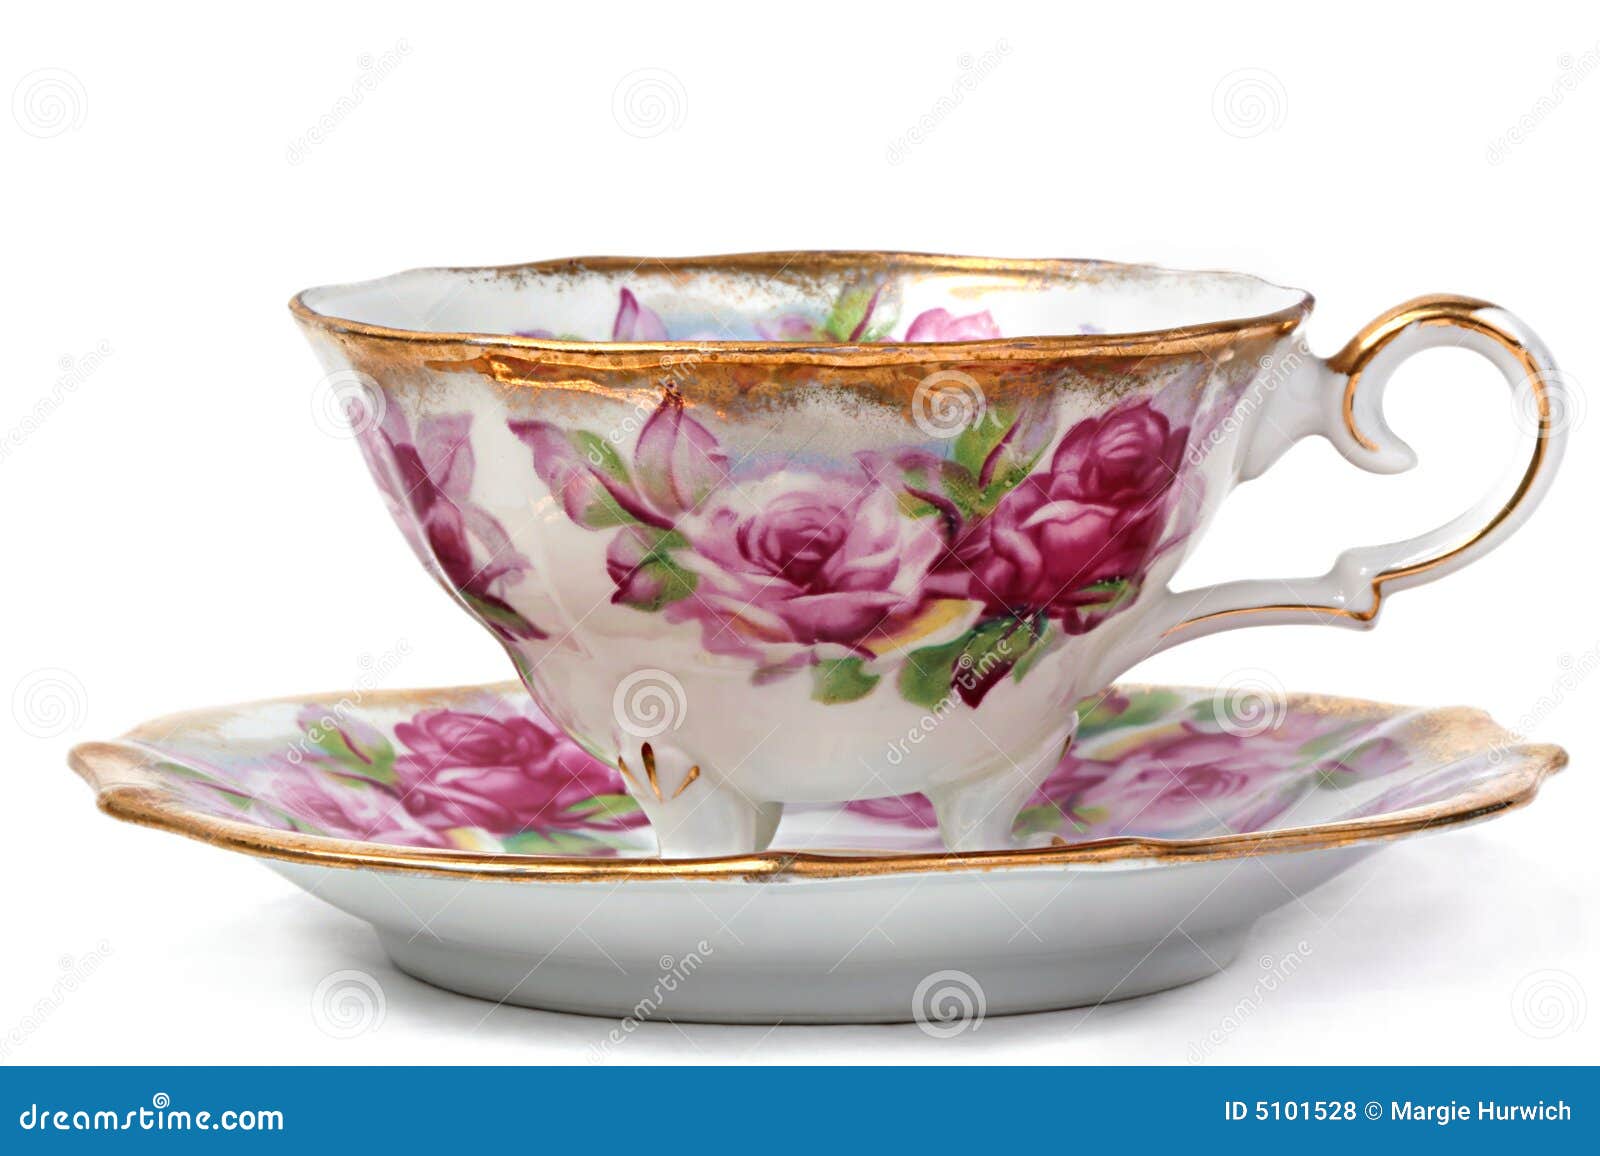 antique teacup and saucer